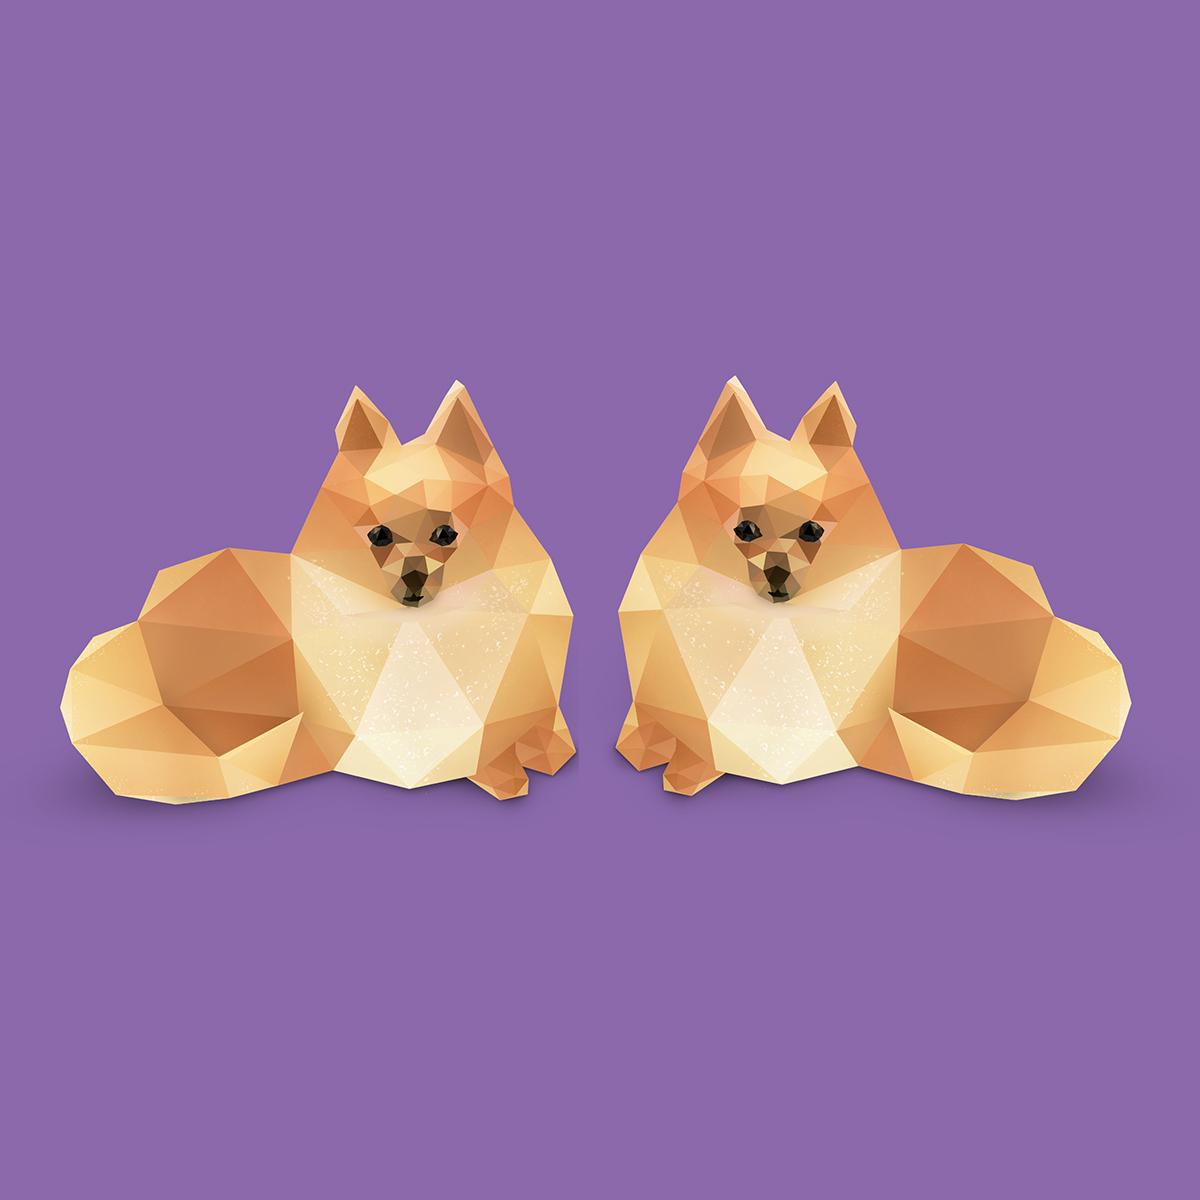 Low Poly low polygon photoshop vector Pomeranian dog dogs puppy pomeranians Low Poly Art vector art